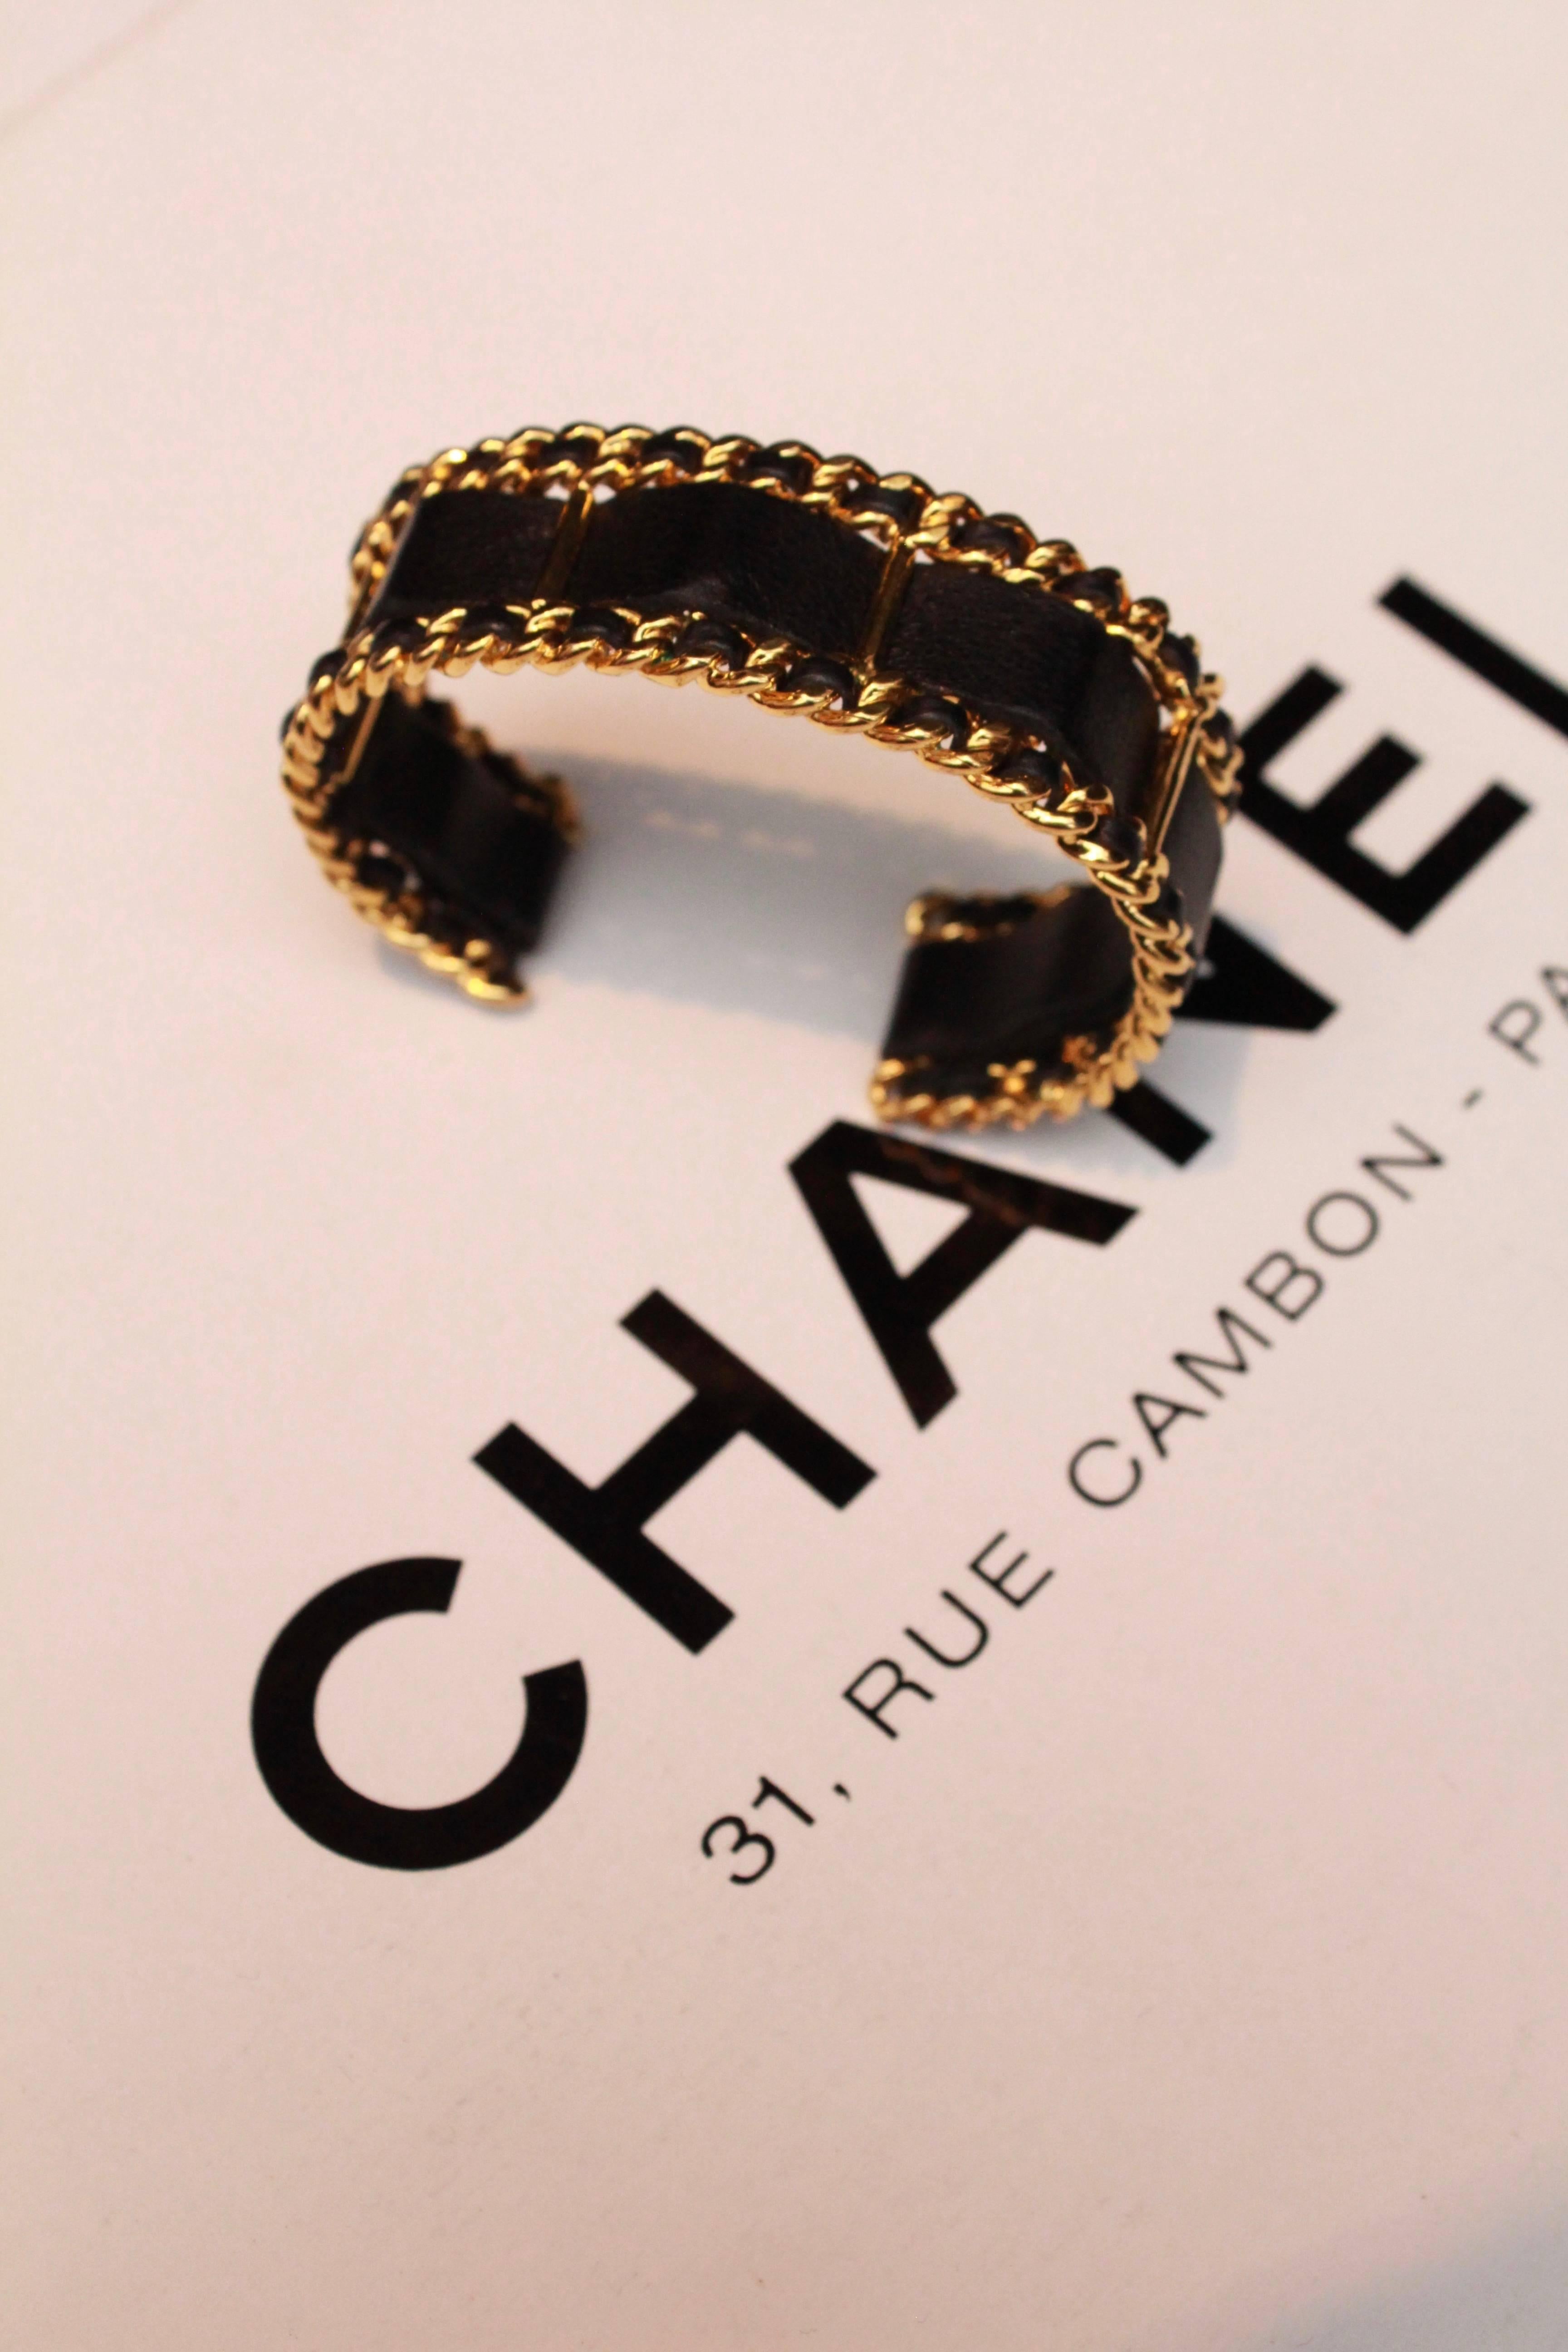 CHANEL (Made in France) Cuff bracelet, comprised of gilded metal base with black leather interwoven throughout. The edges of the bracelet are comprised of gilded metal chain with an interwoven leather cord, the center features a black leather